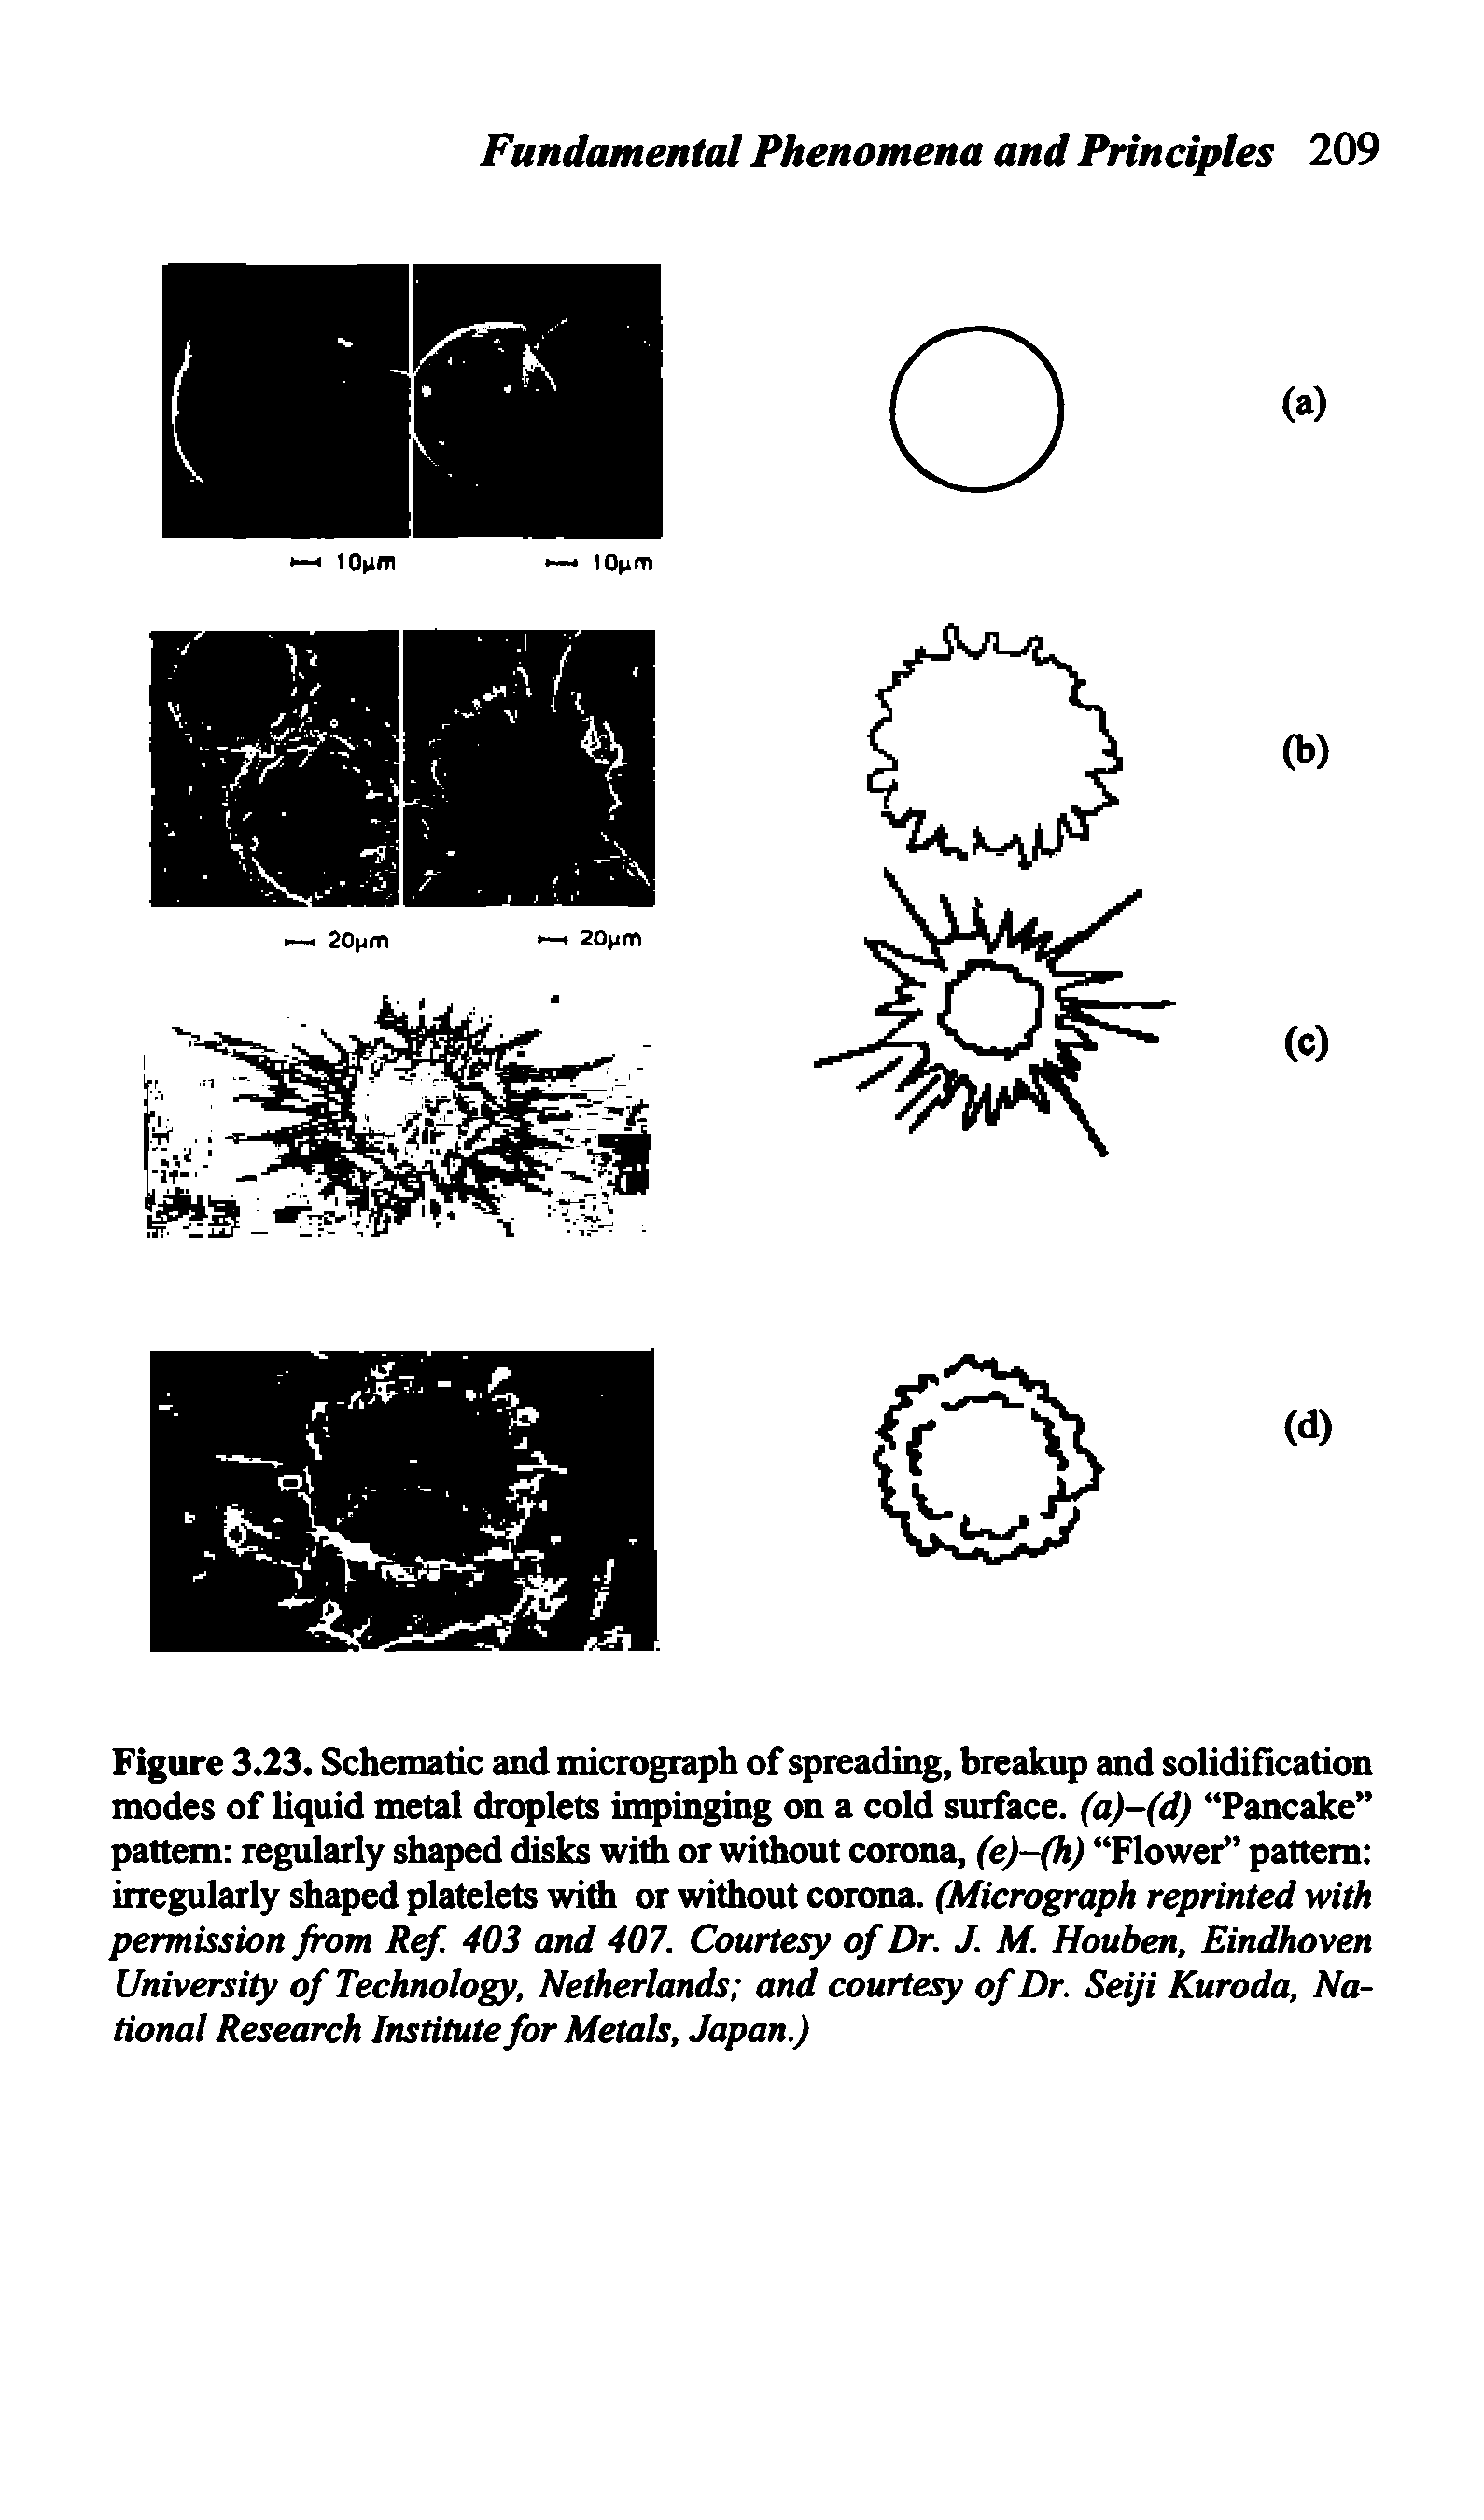 Figure 3.23. Schematic and micrograph of spreading, breakup and solidification modes of liquid metal droplets impinging on a cold surface. (a)-(d) Pancake pattern regularly shaped disks with or without corona, (e)-(h) Flower pattern irregularly shaped platelets with or without corona. (Micrograph reprinted with permission from Ref. 403 and 407. Courtesy of Dr. J. M. Houben, Eindhoven University of Technology, Netherlands and courtesy of Dr. Seiji Kuroda, National Research Institute for Metals, Japan.)...